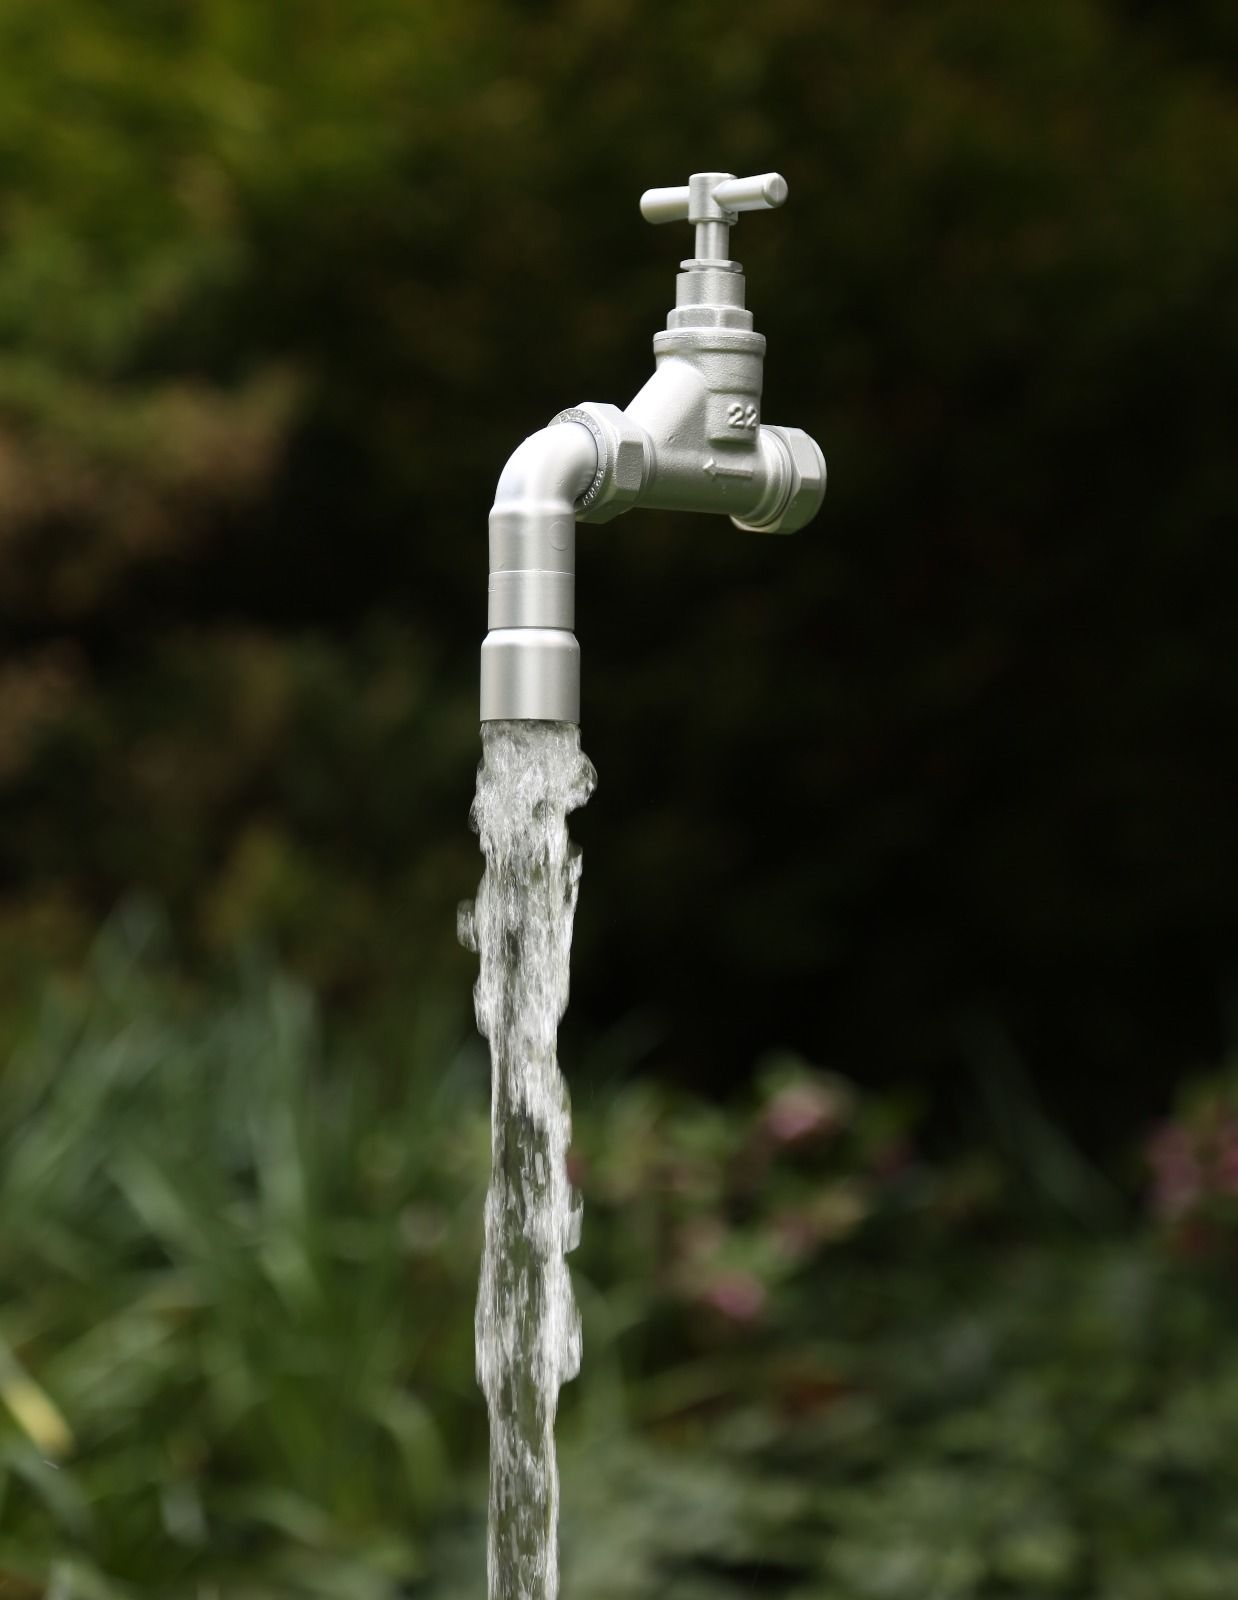 22mm Floating Tap Water Feature Including Pump (container not included) FREE UK DELIVERY